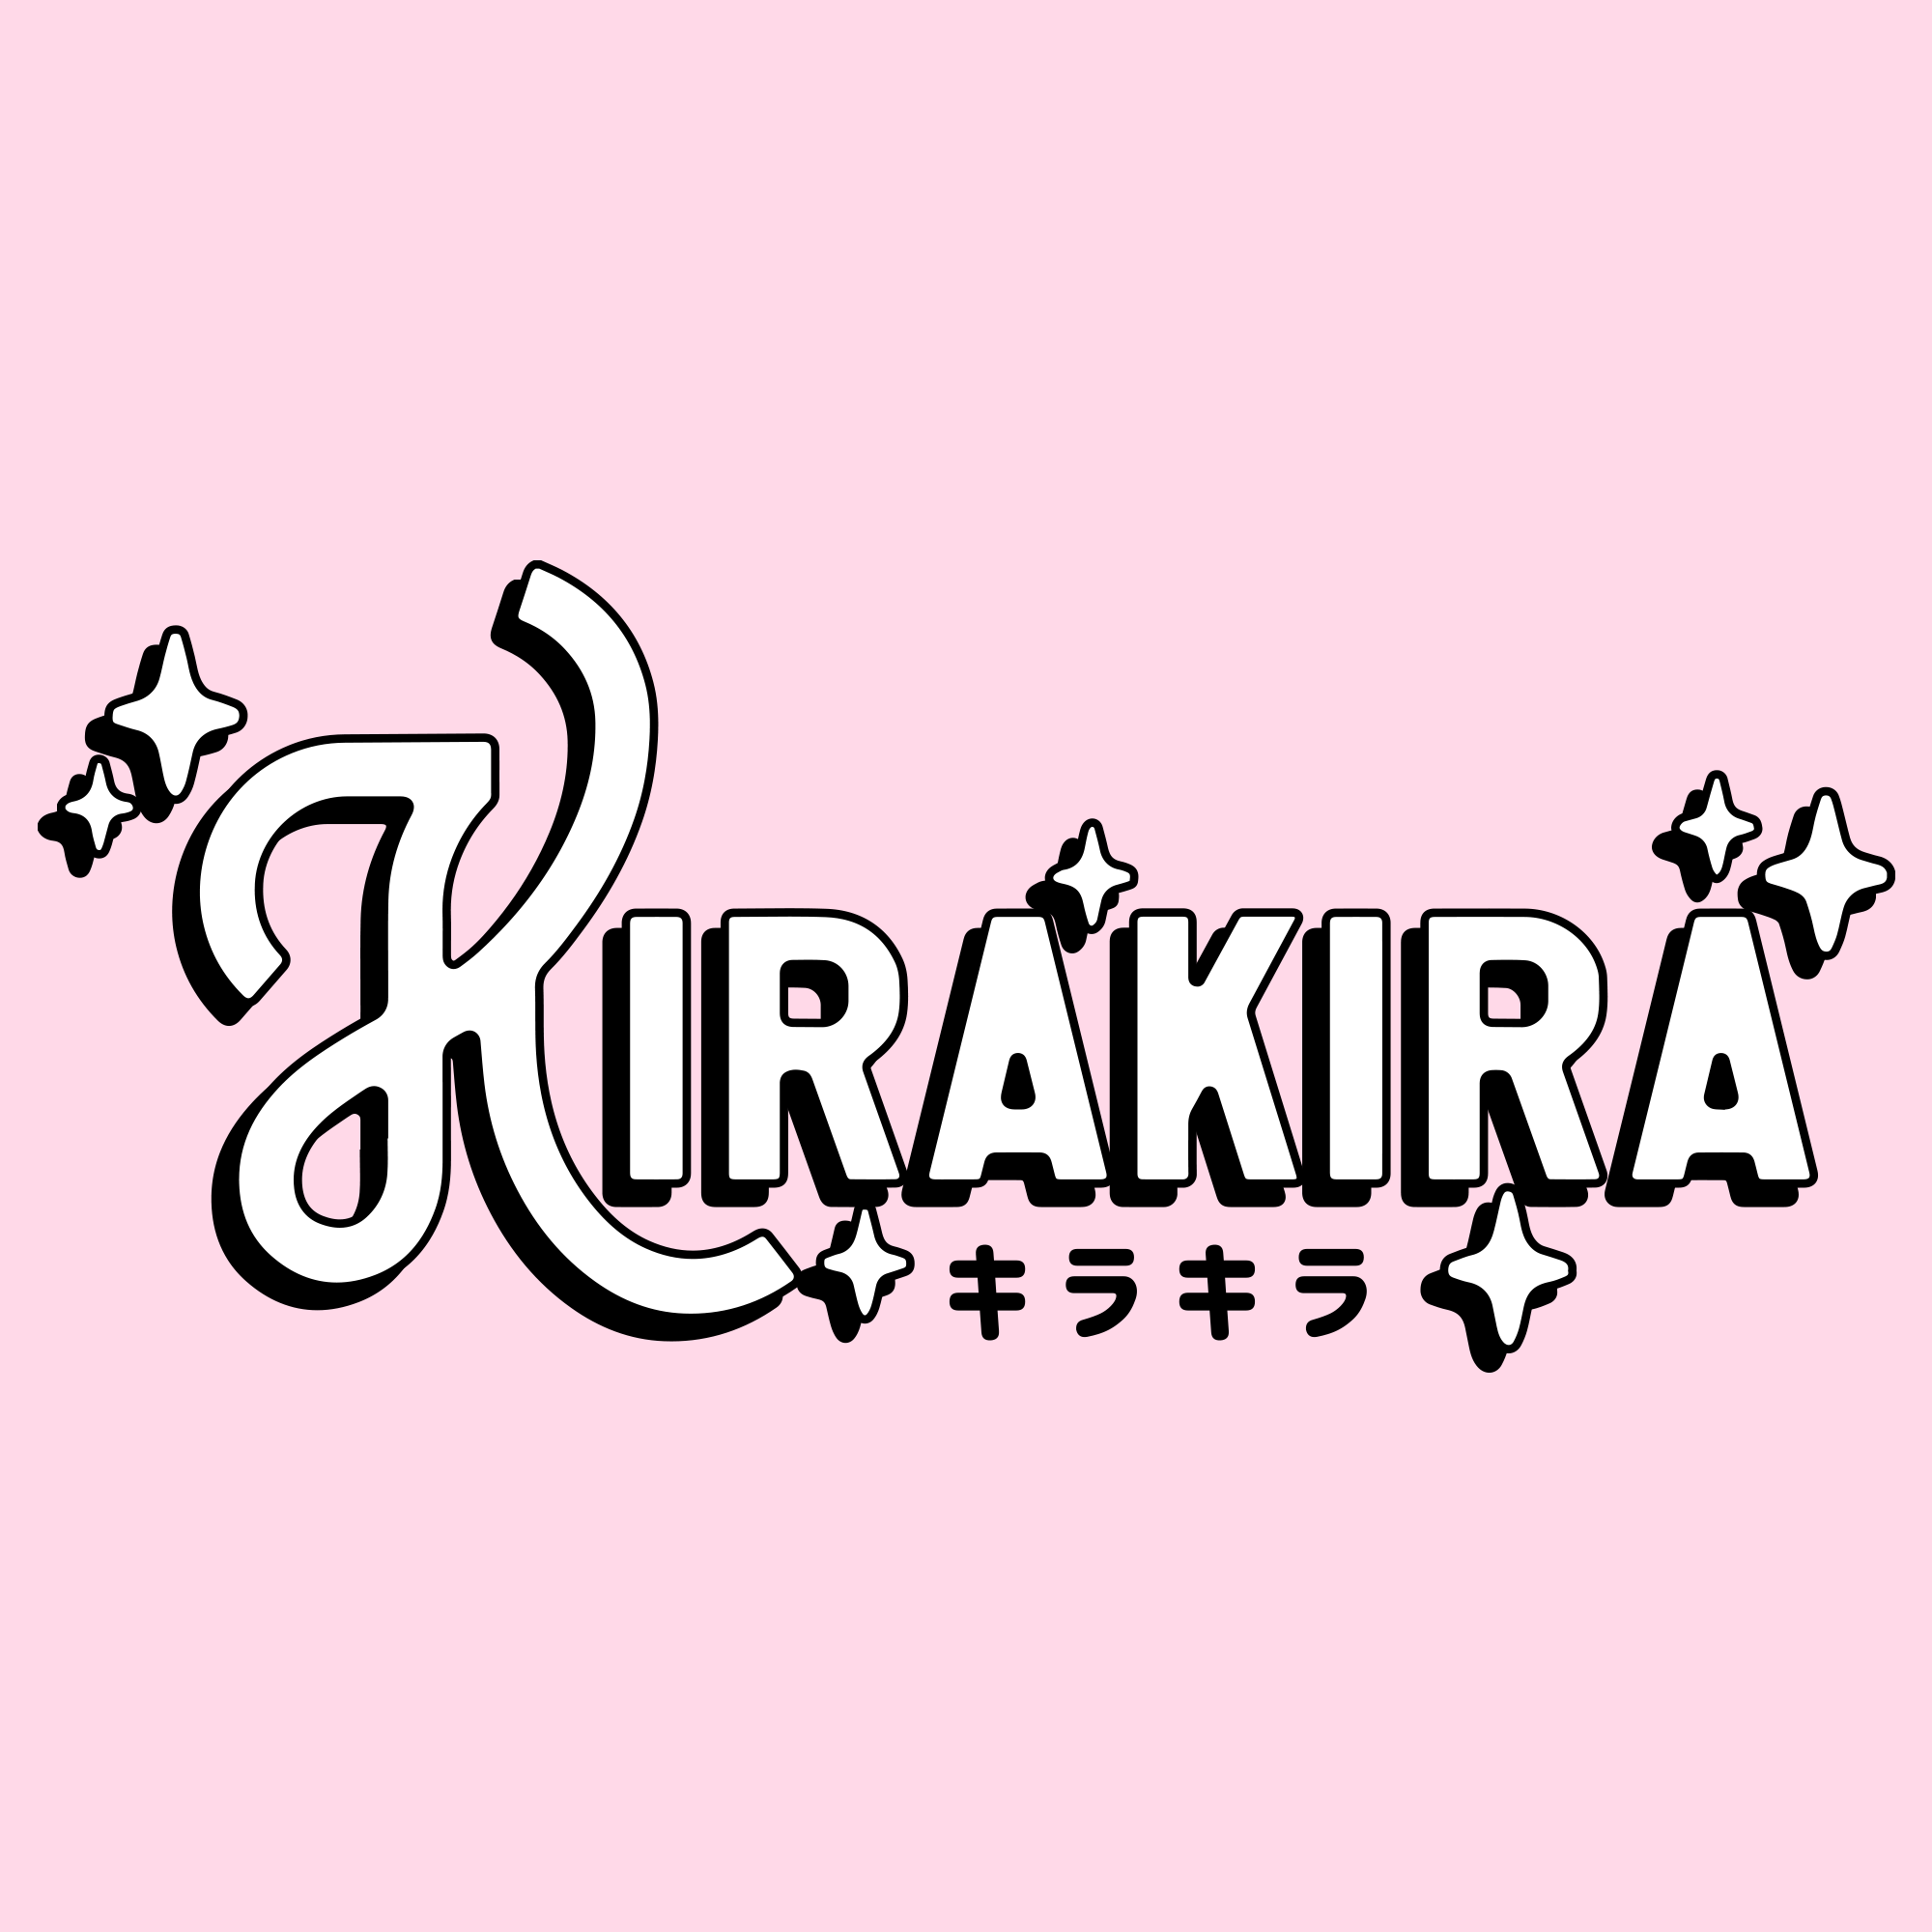 Kira Kira - Independently designed products inspired by all things cute